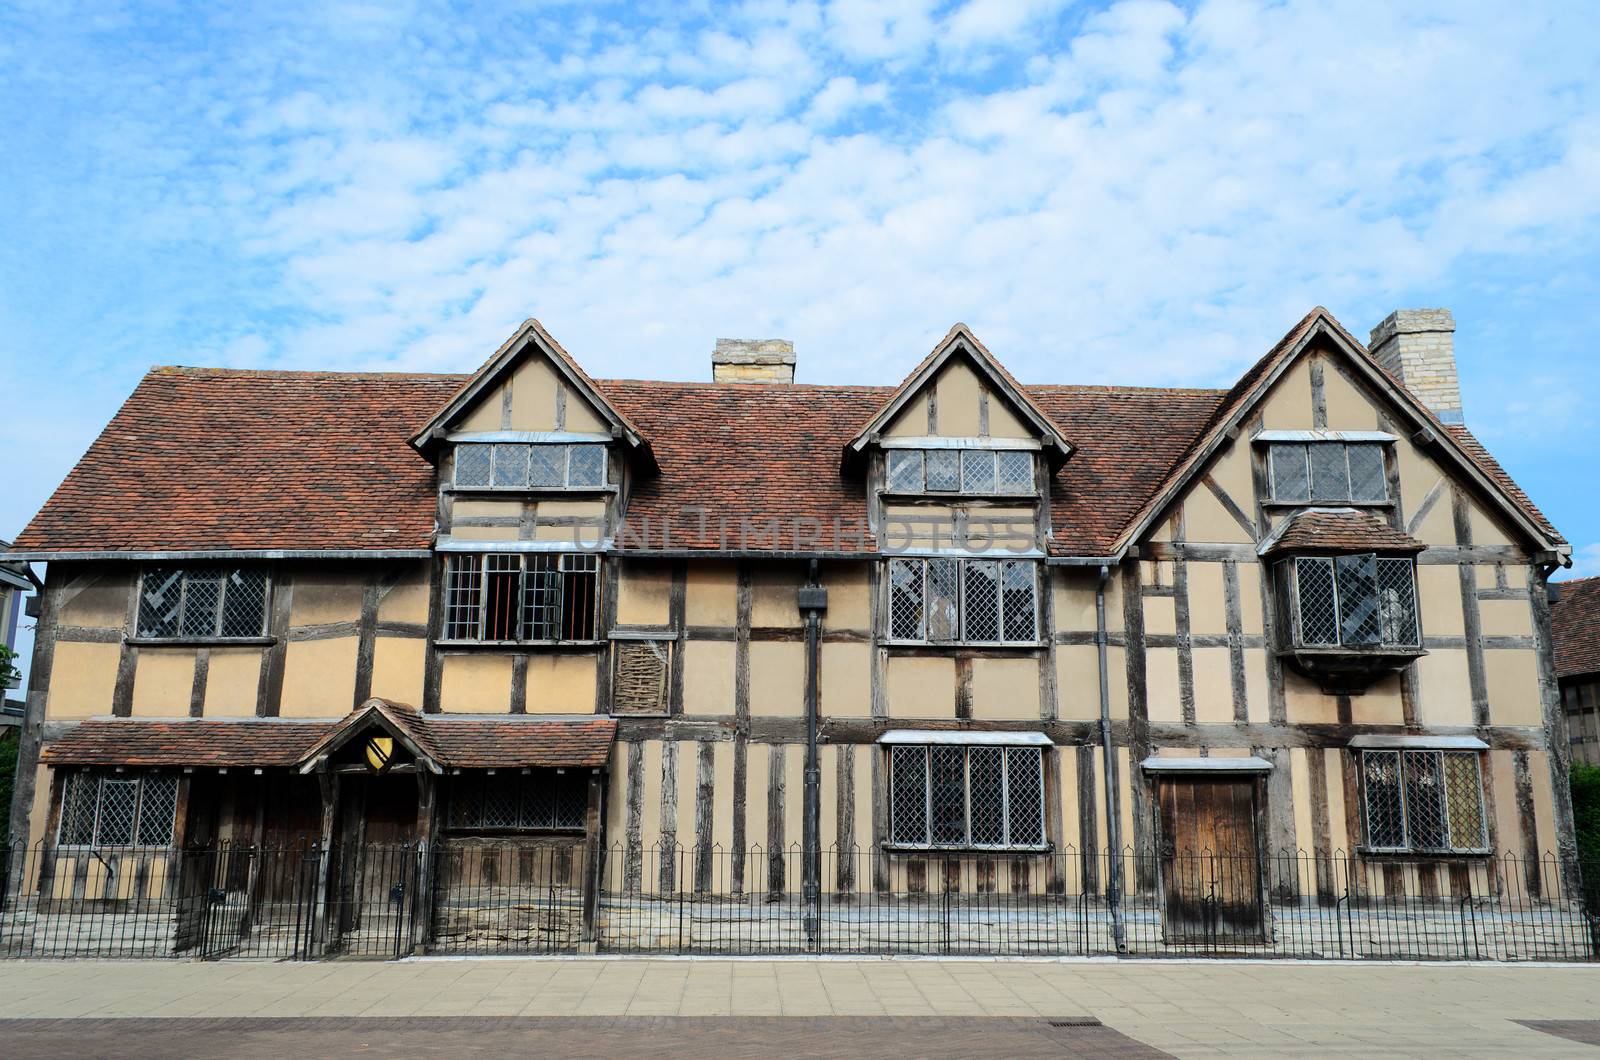 Birthplace of Shakespeare by pljvv